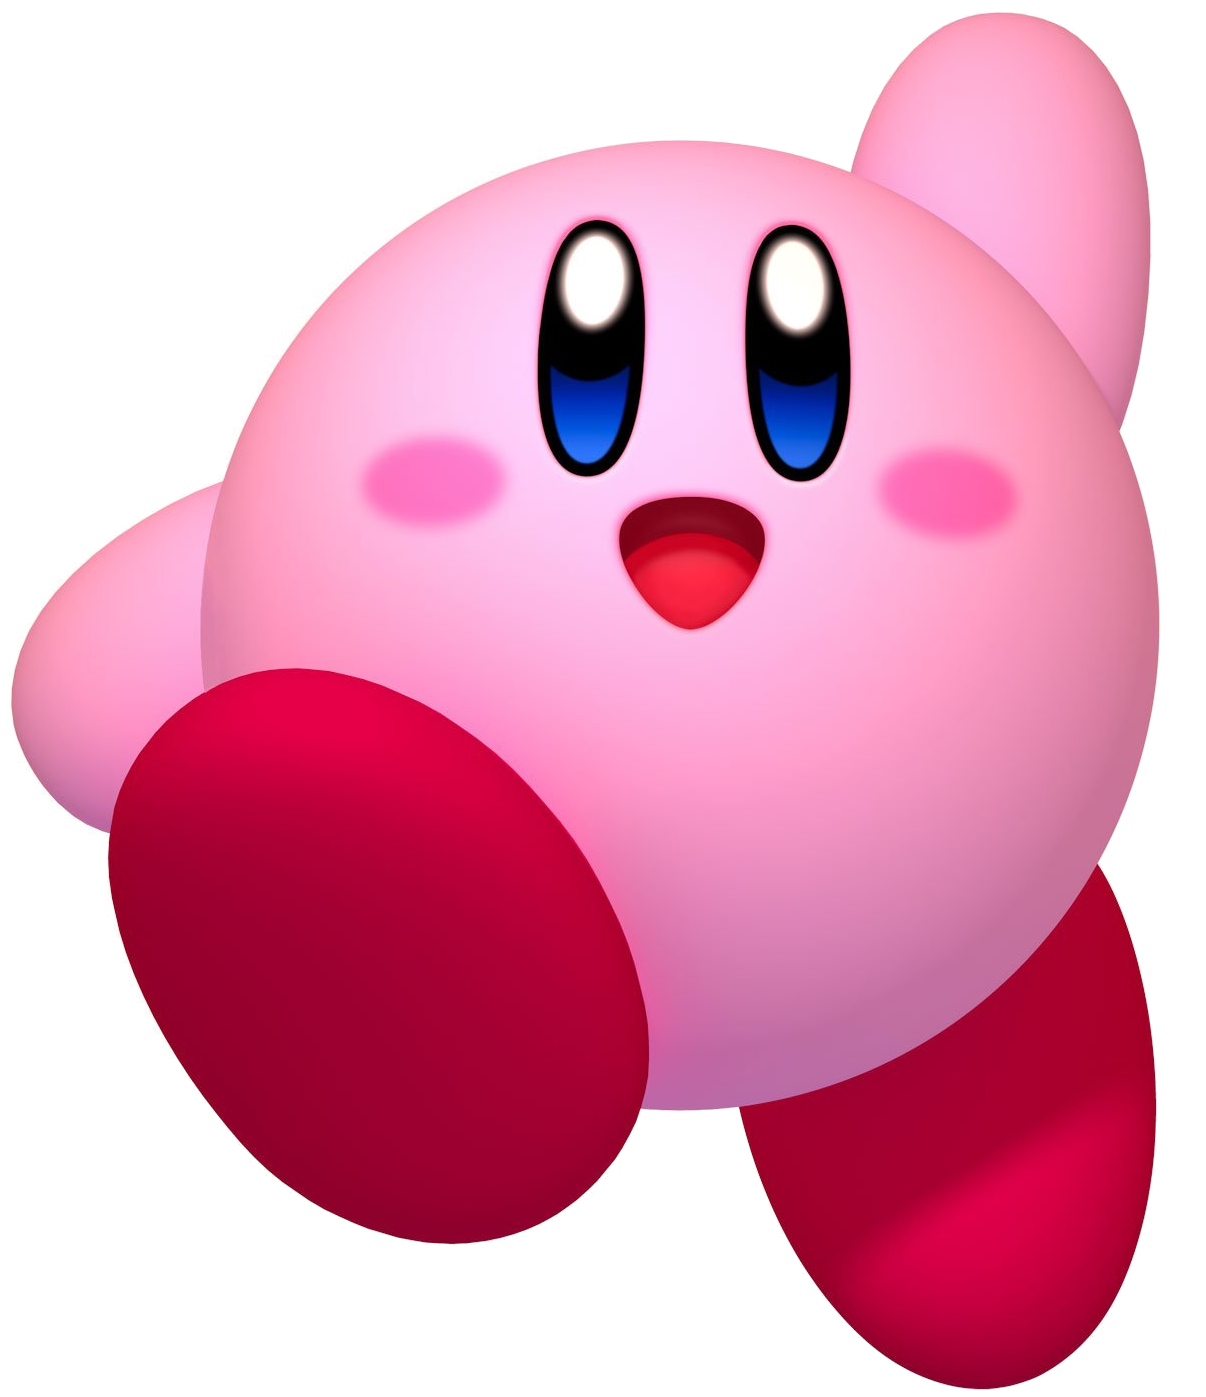 Kirby's Return to Dream Land Deluxe - WiKirby: it's a wiki, about Kirby!